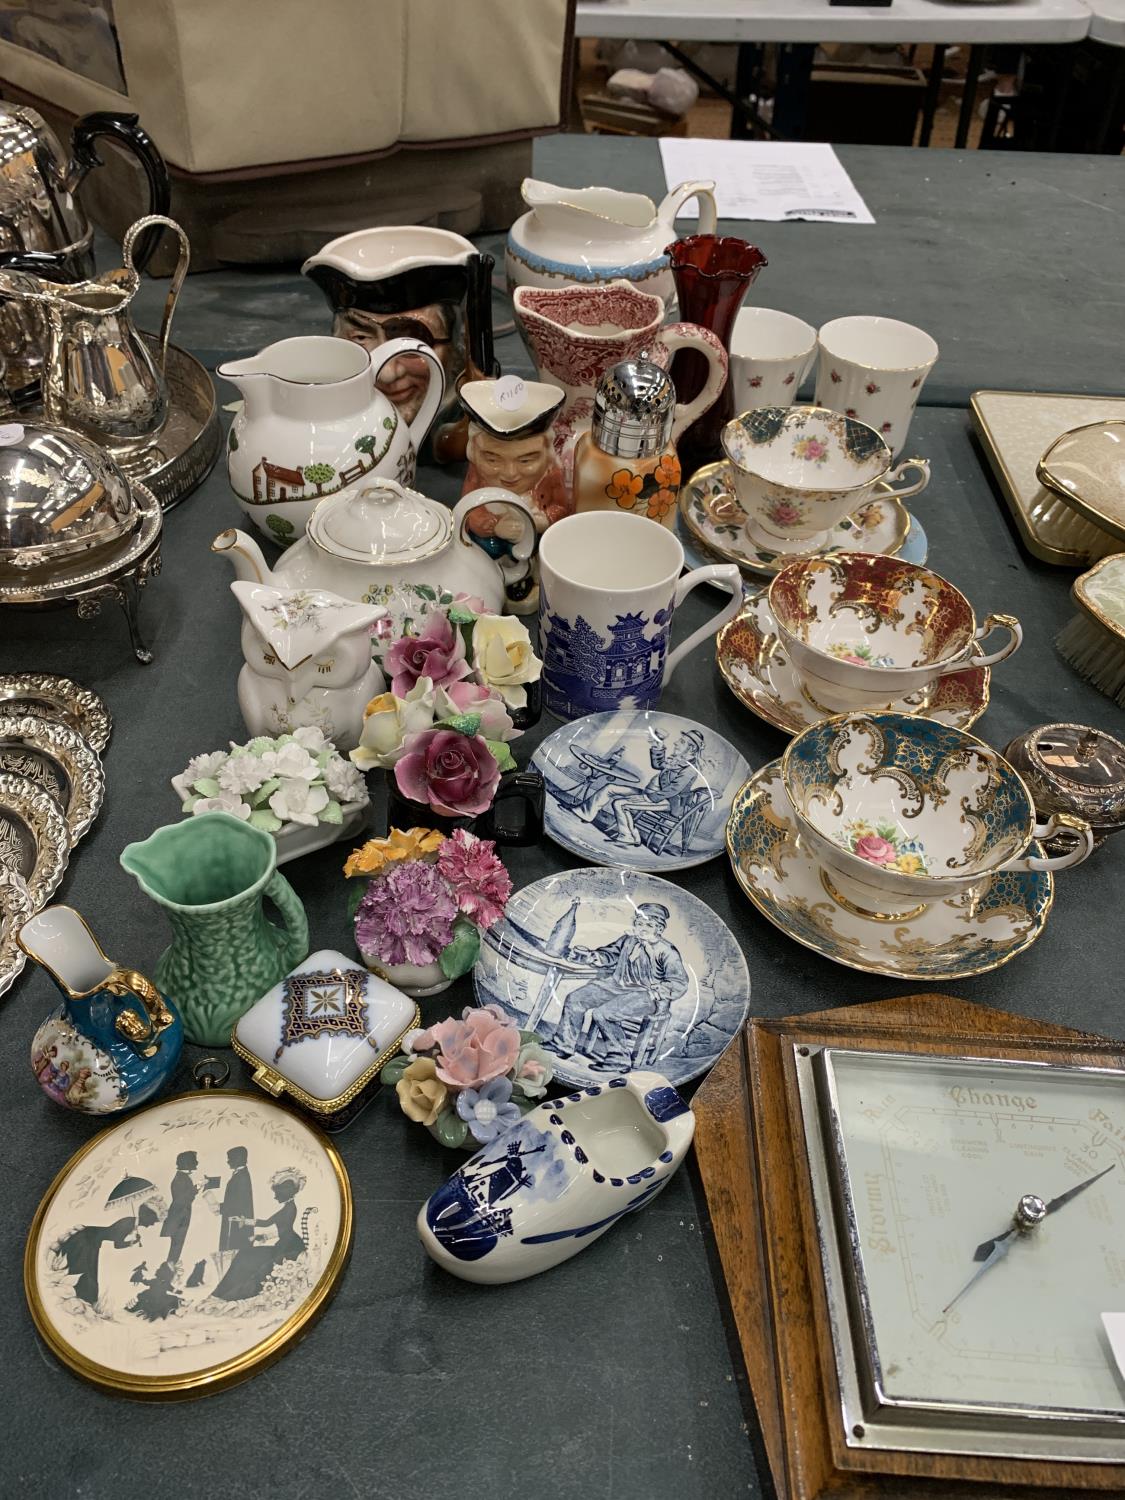 A LARGE QUANTITY OF CERAMIC AND CHINA TO INCLUDE PARAGON CUPS AND SAUCERS, FLORAL POSIES, CROWN - Image 7 of 8